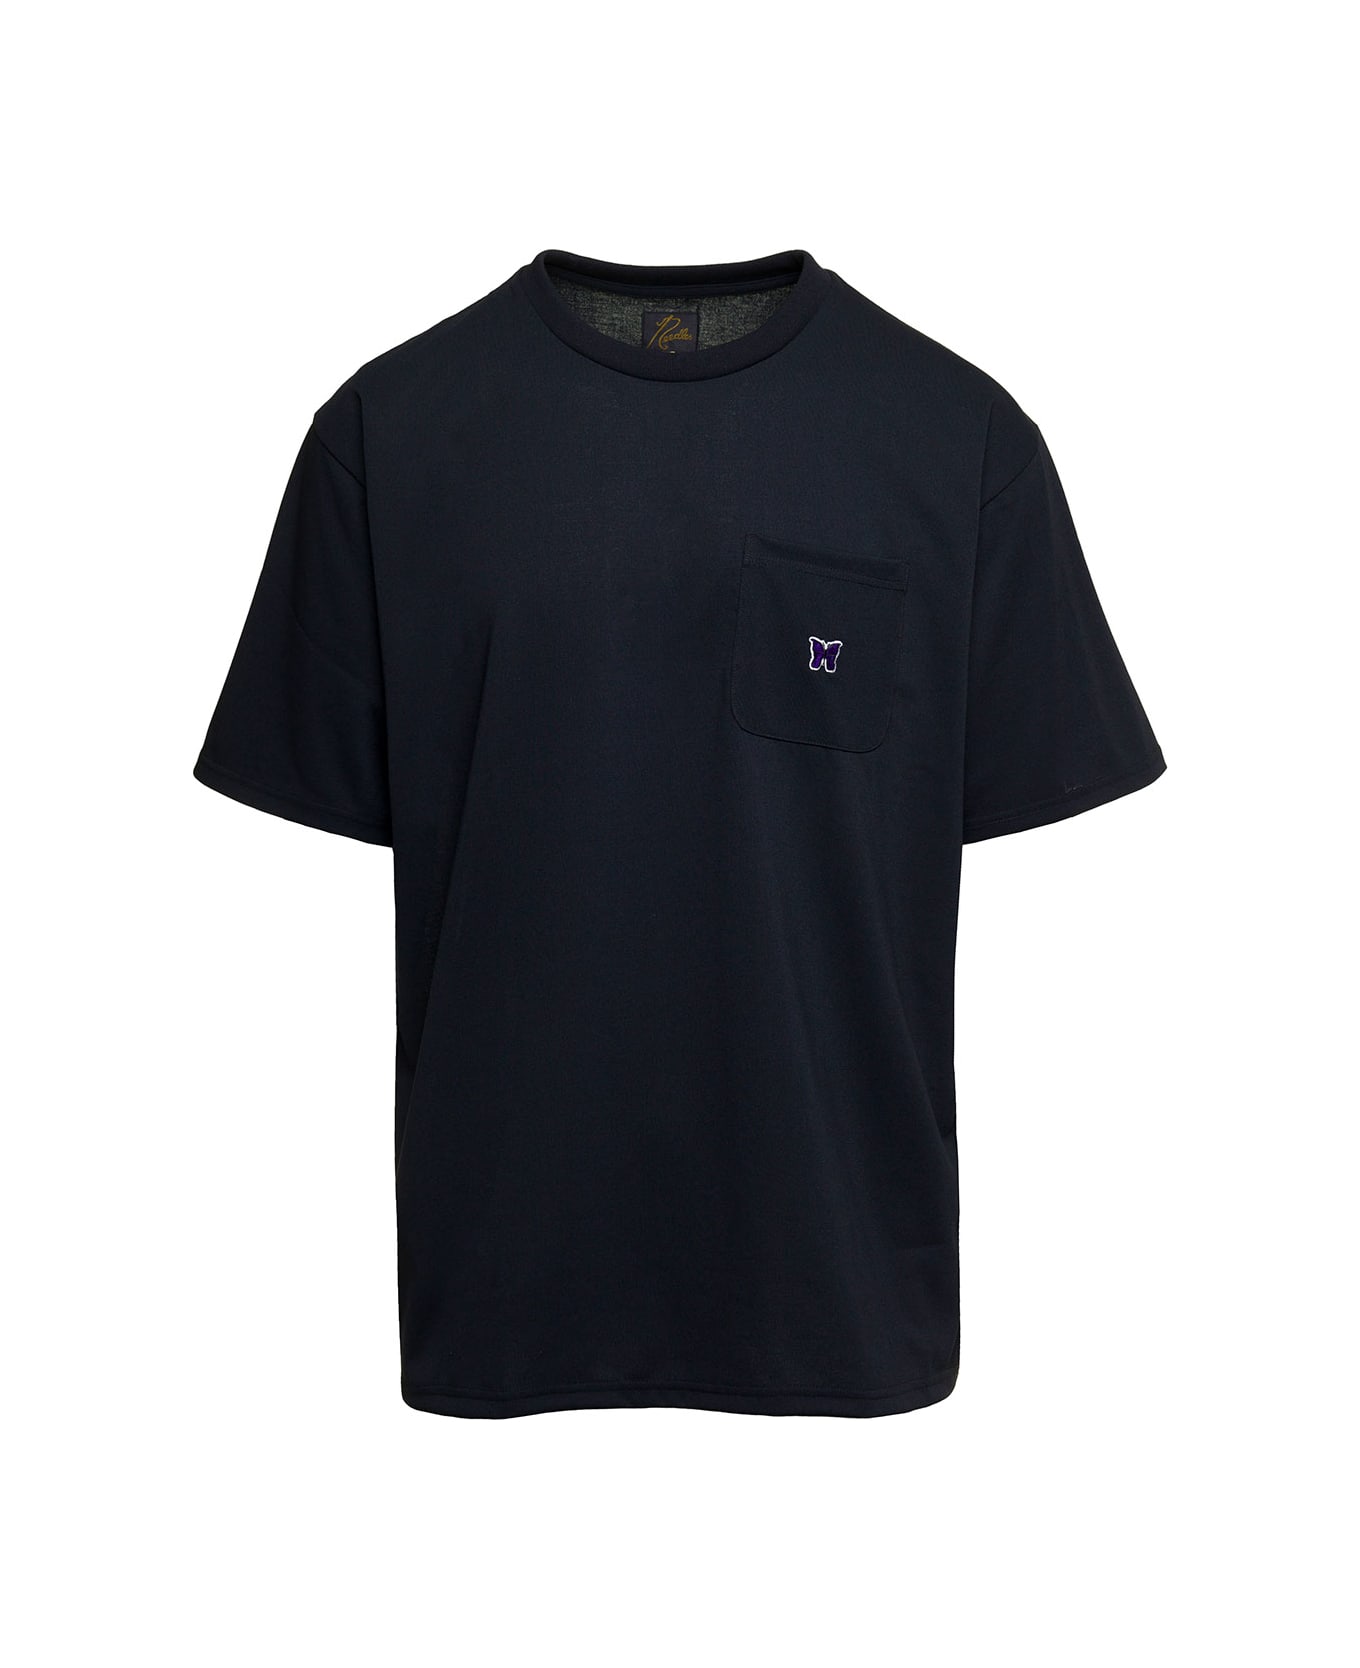 Needles T-shirt With Pocket And Logo In Black Technical Fabric Man - Black